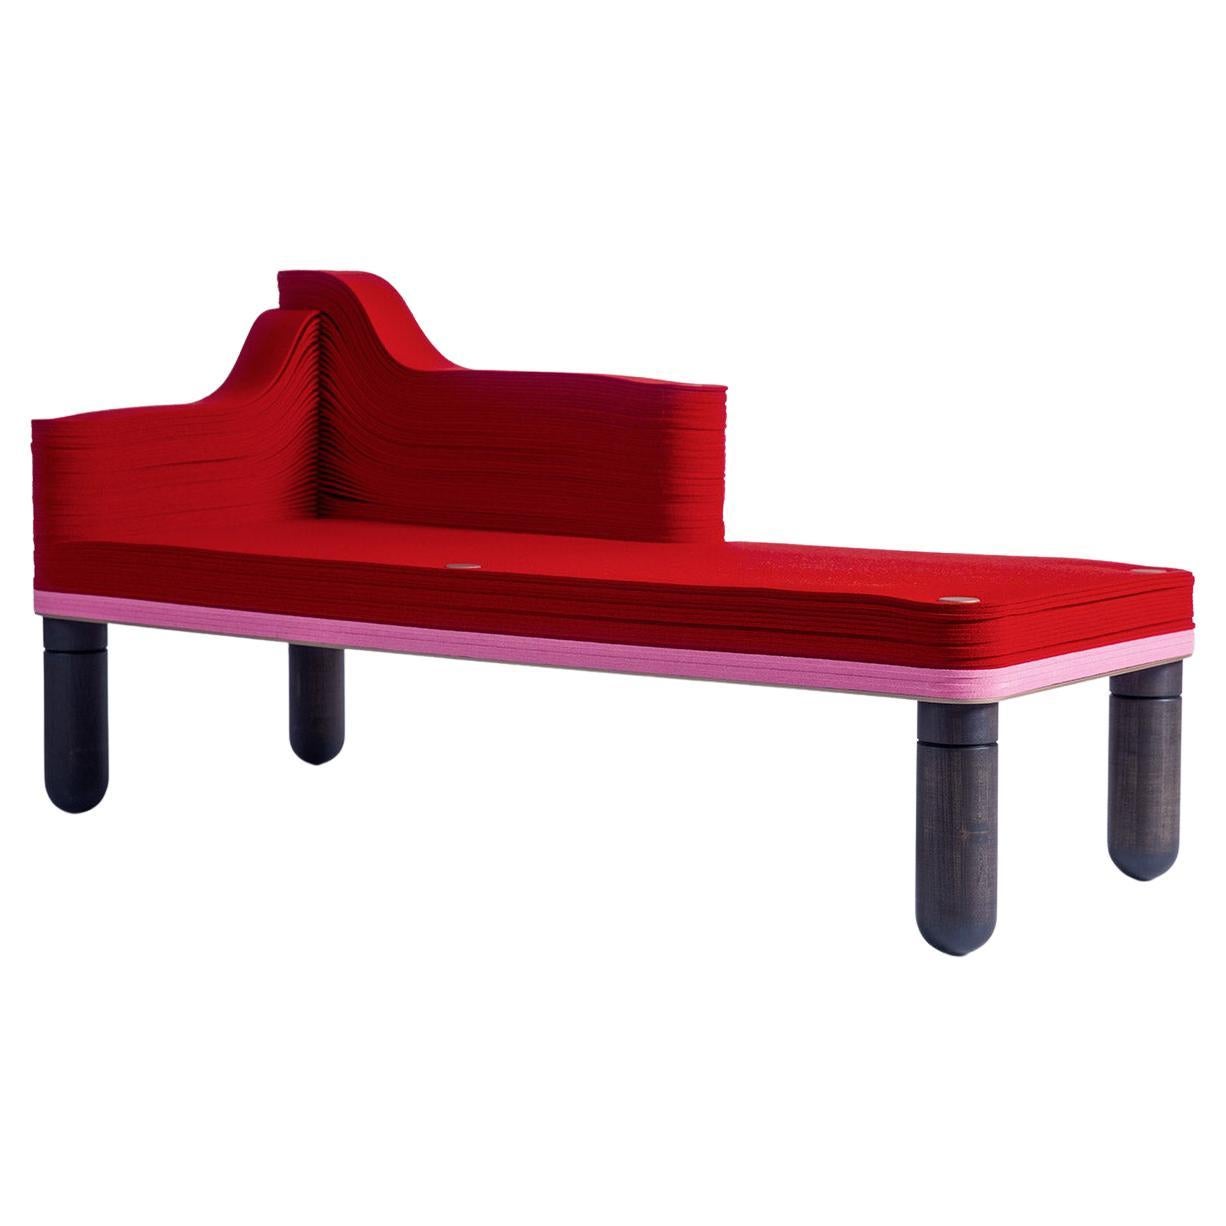 Madame F, Felt and Wood Chaise Lounge, Drake / Anderson in Stackabl For Sale